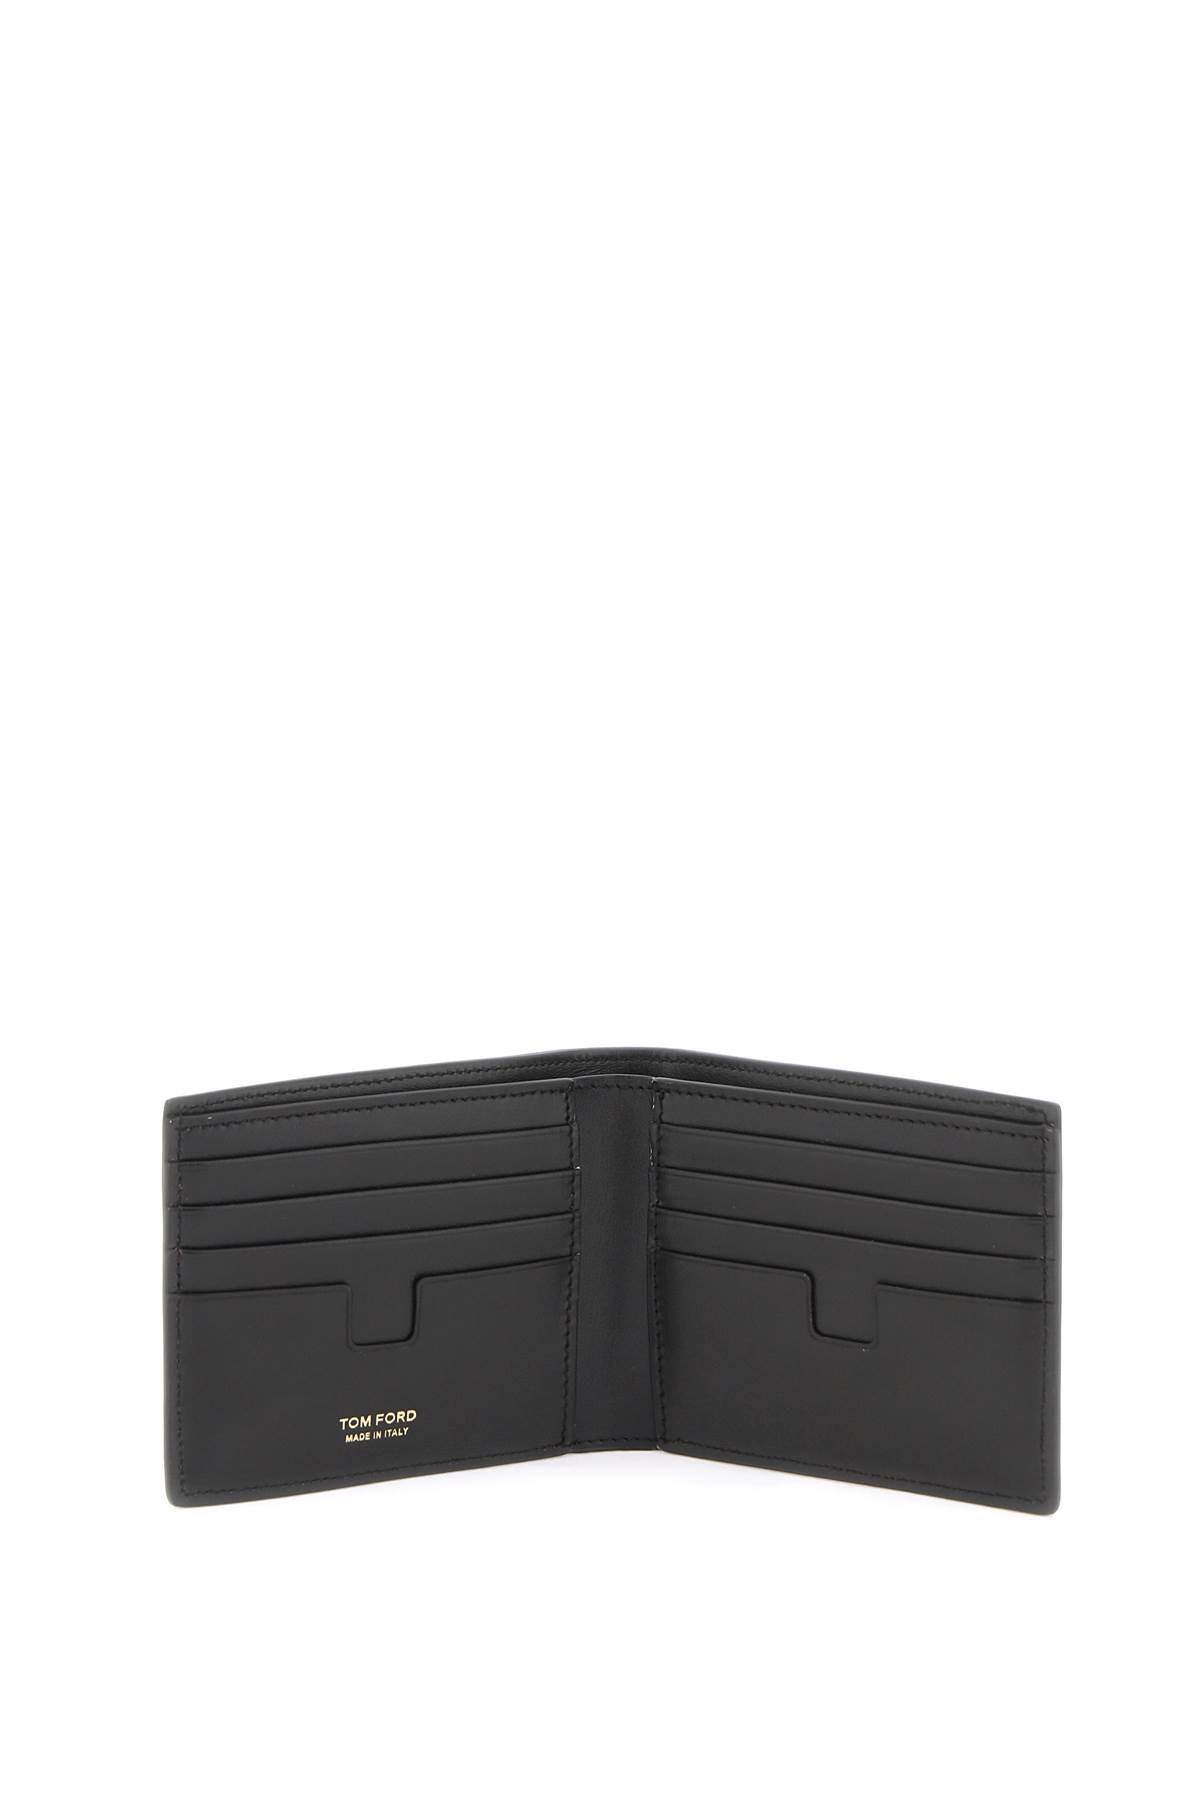 Tom Ford Tom ford crocodile print leather wallet with eight